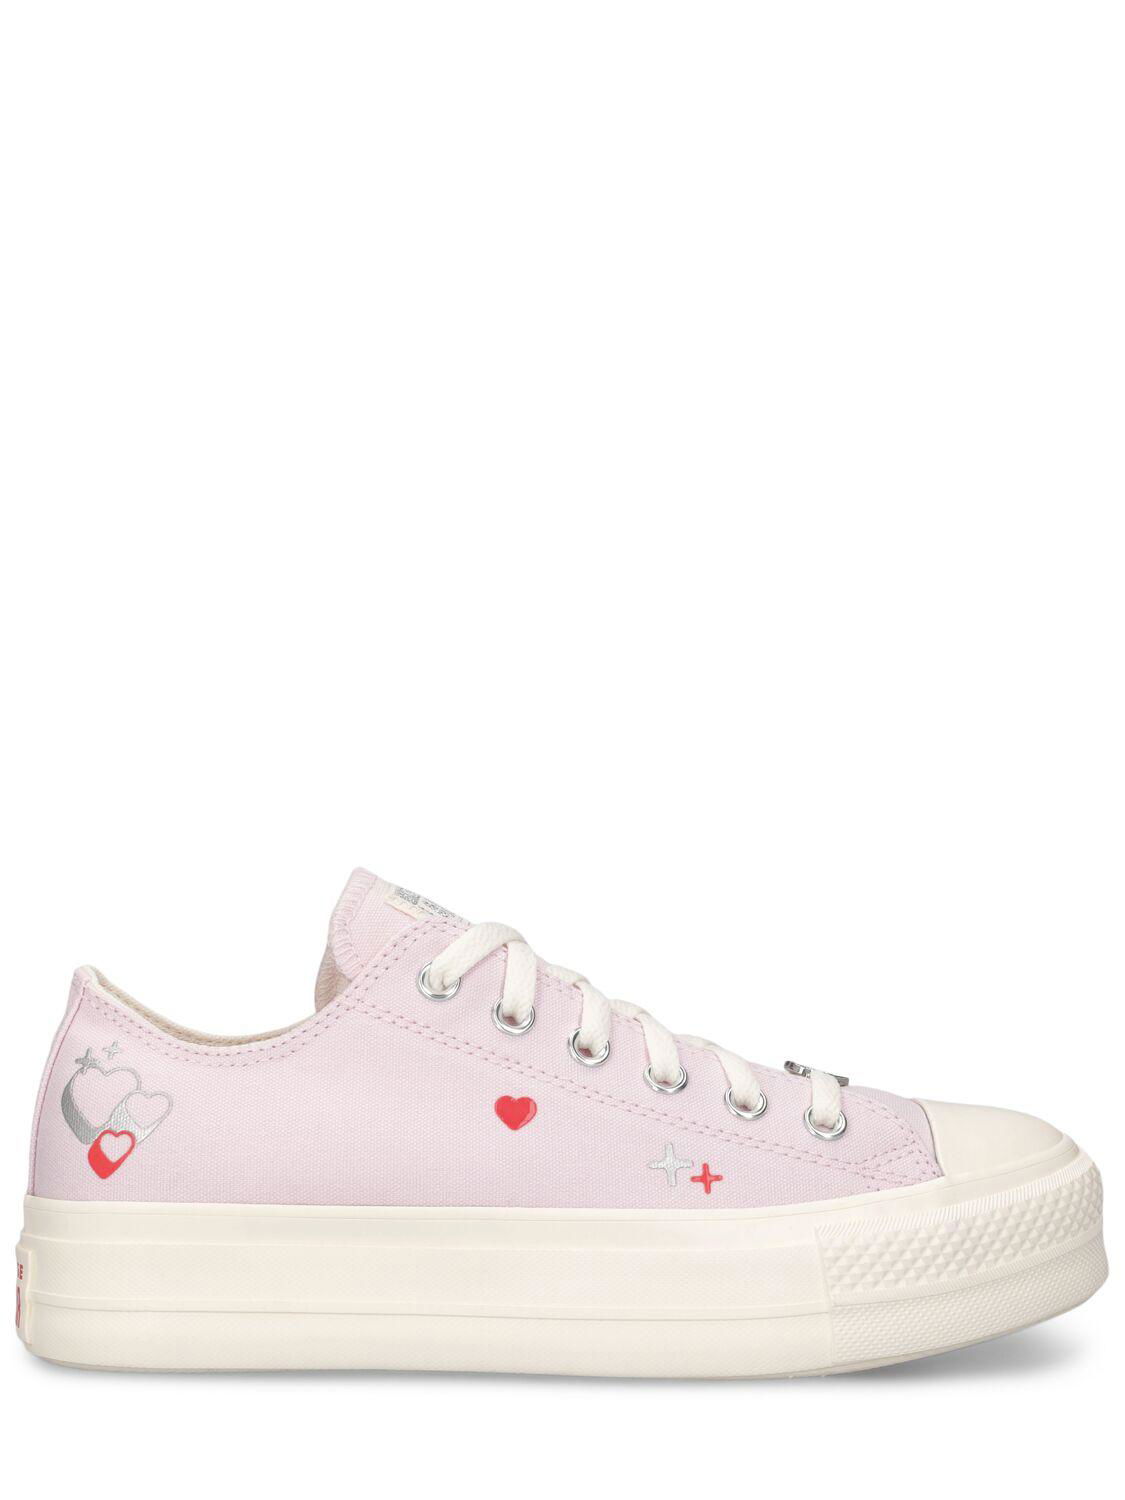 Chuck Taylor All Star Lift Sneakers by CONVERSE